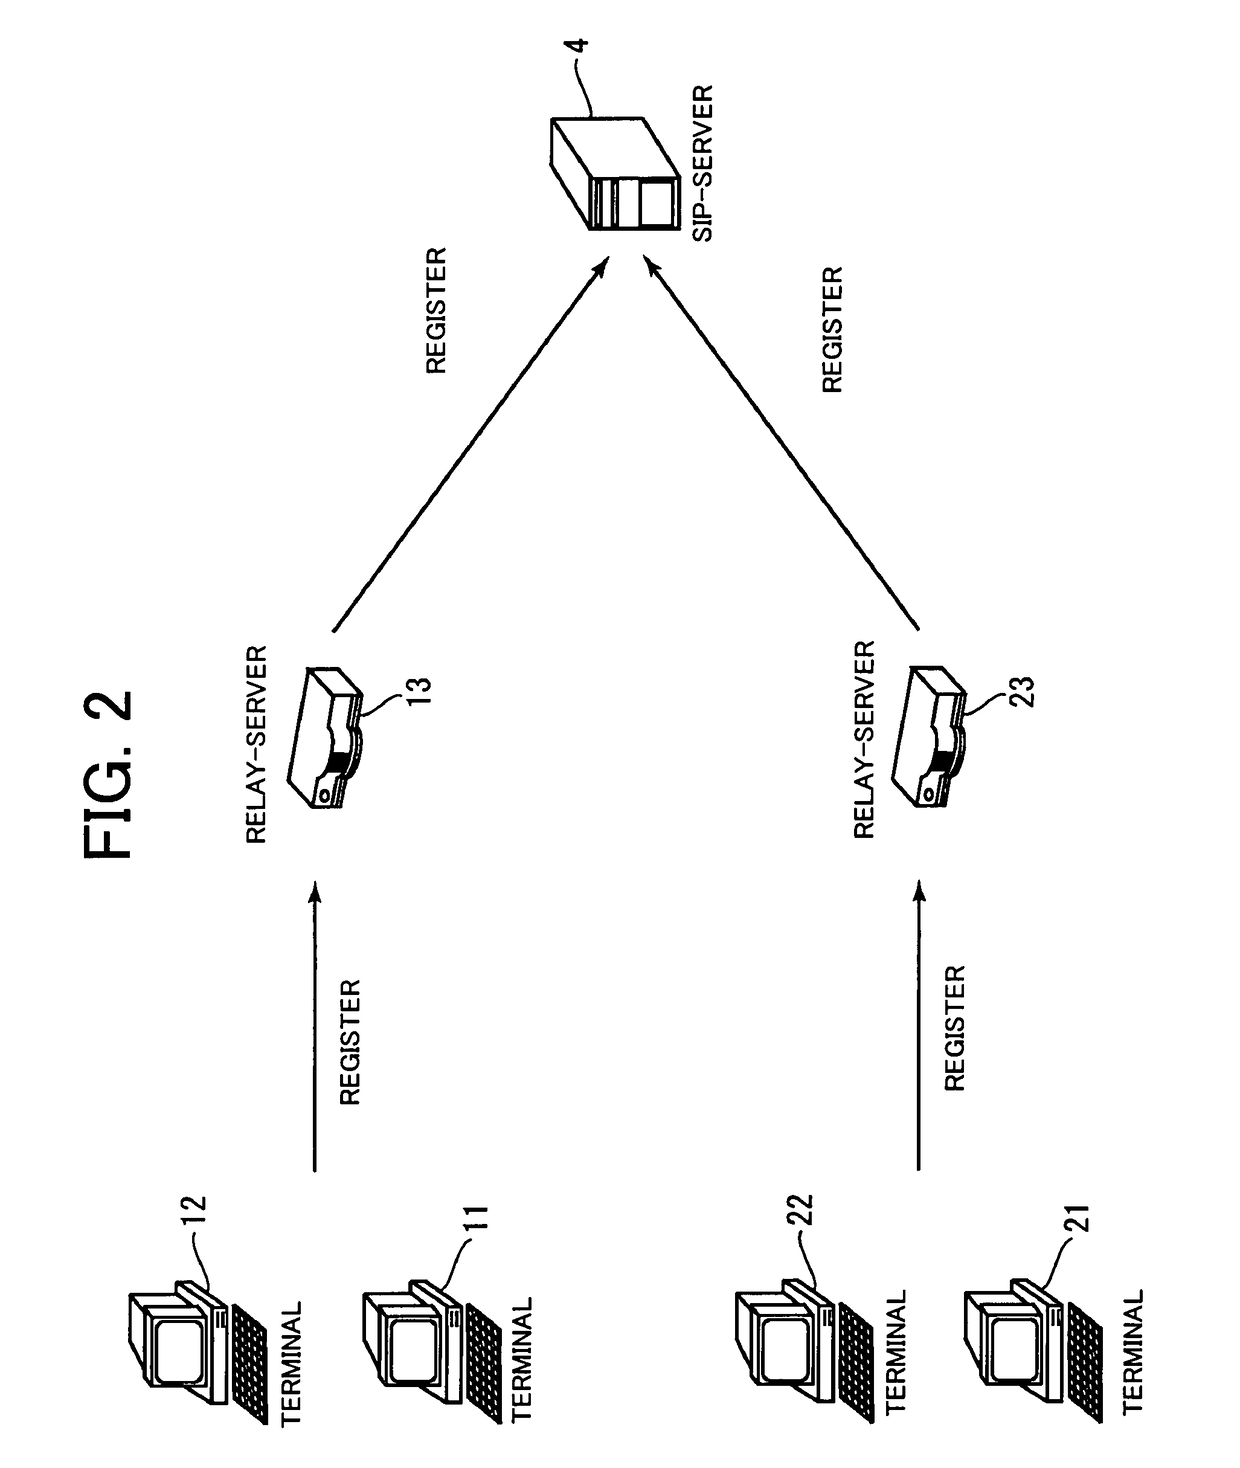 Relay-server arranged to carry out communications between communication terminals on different LANS